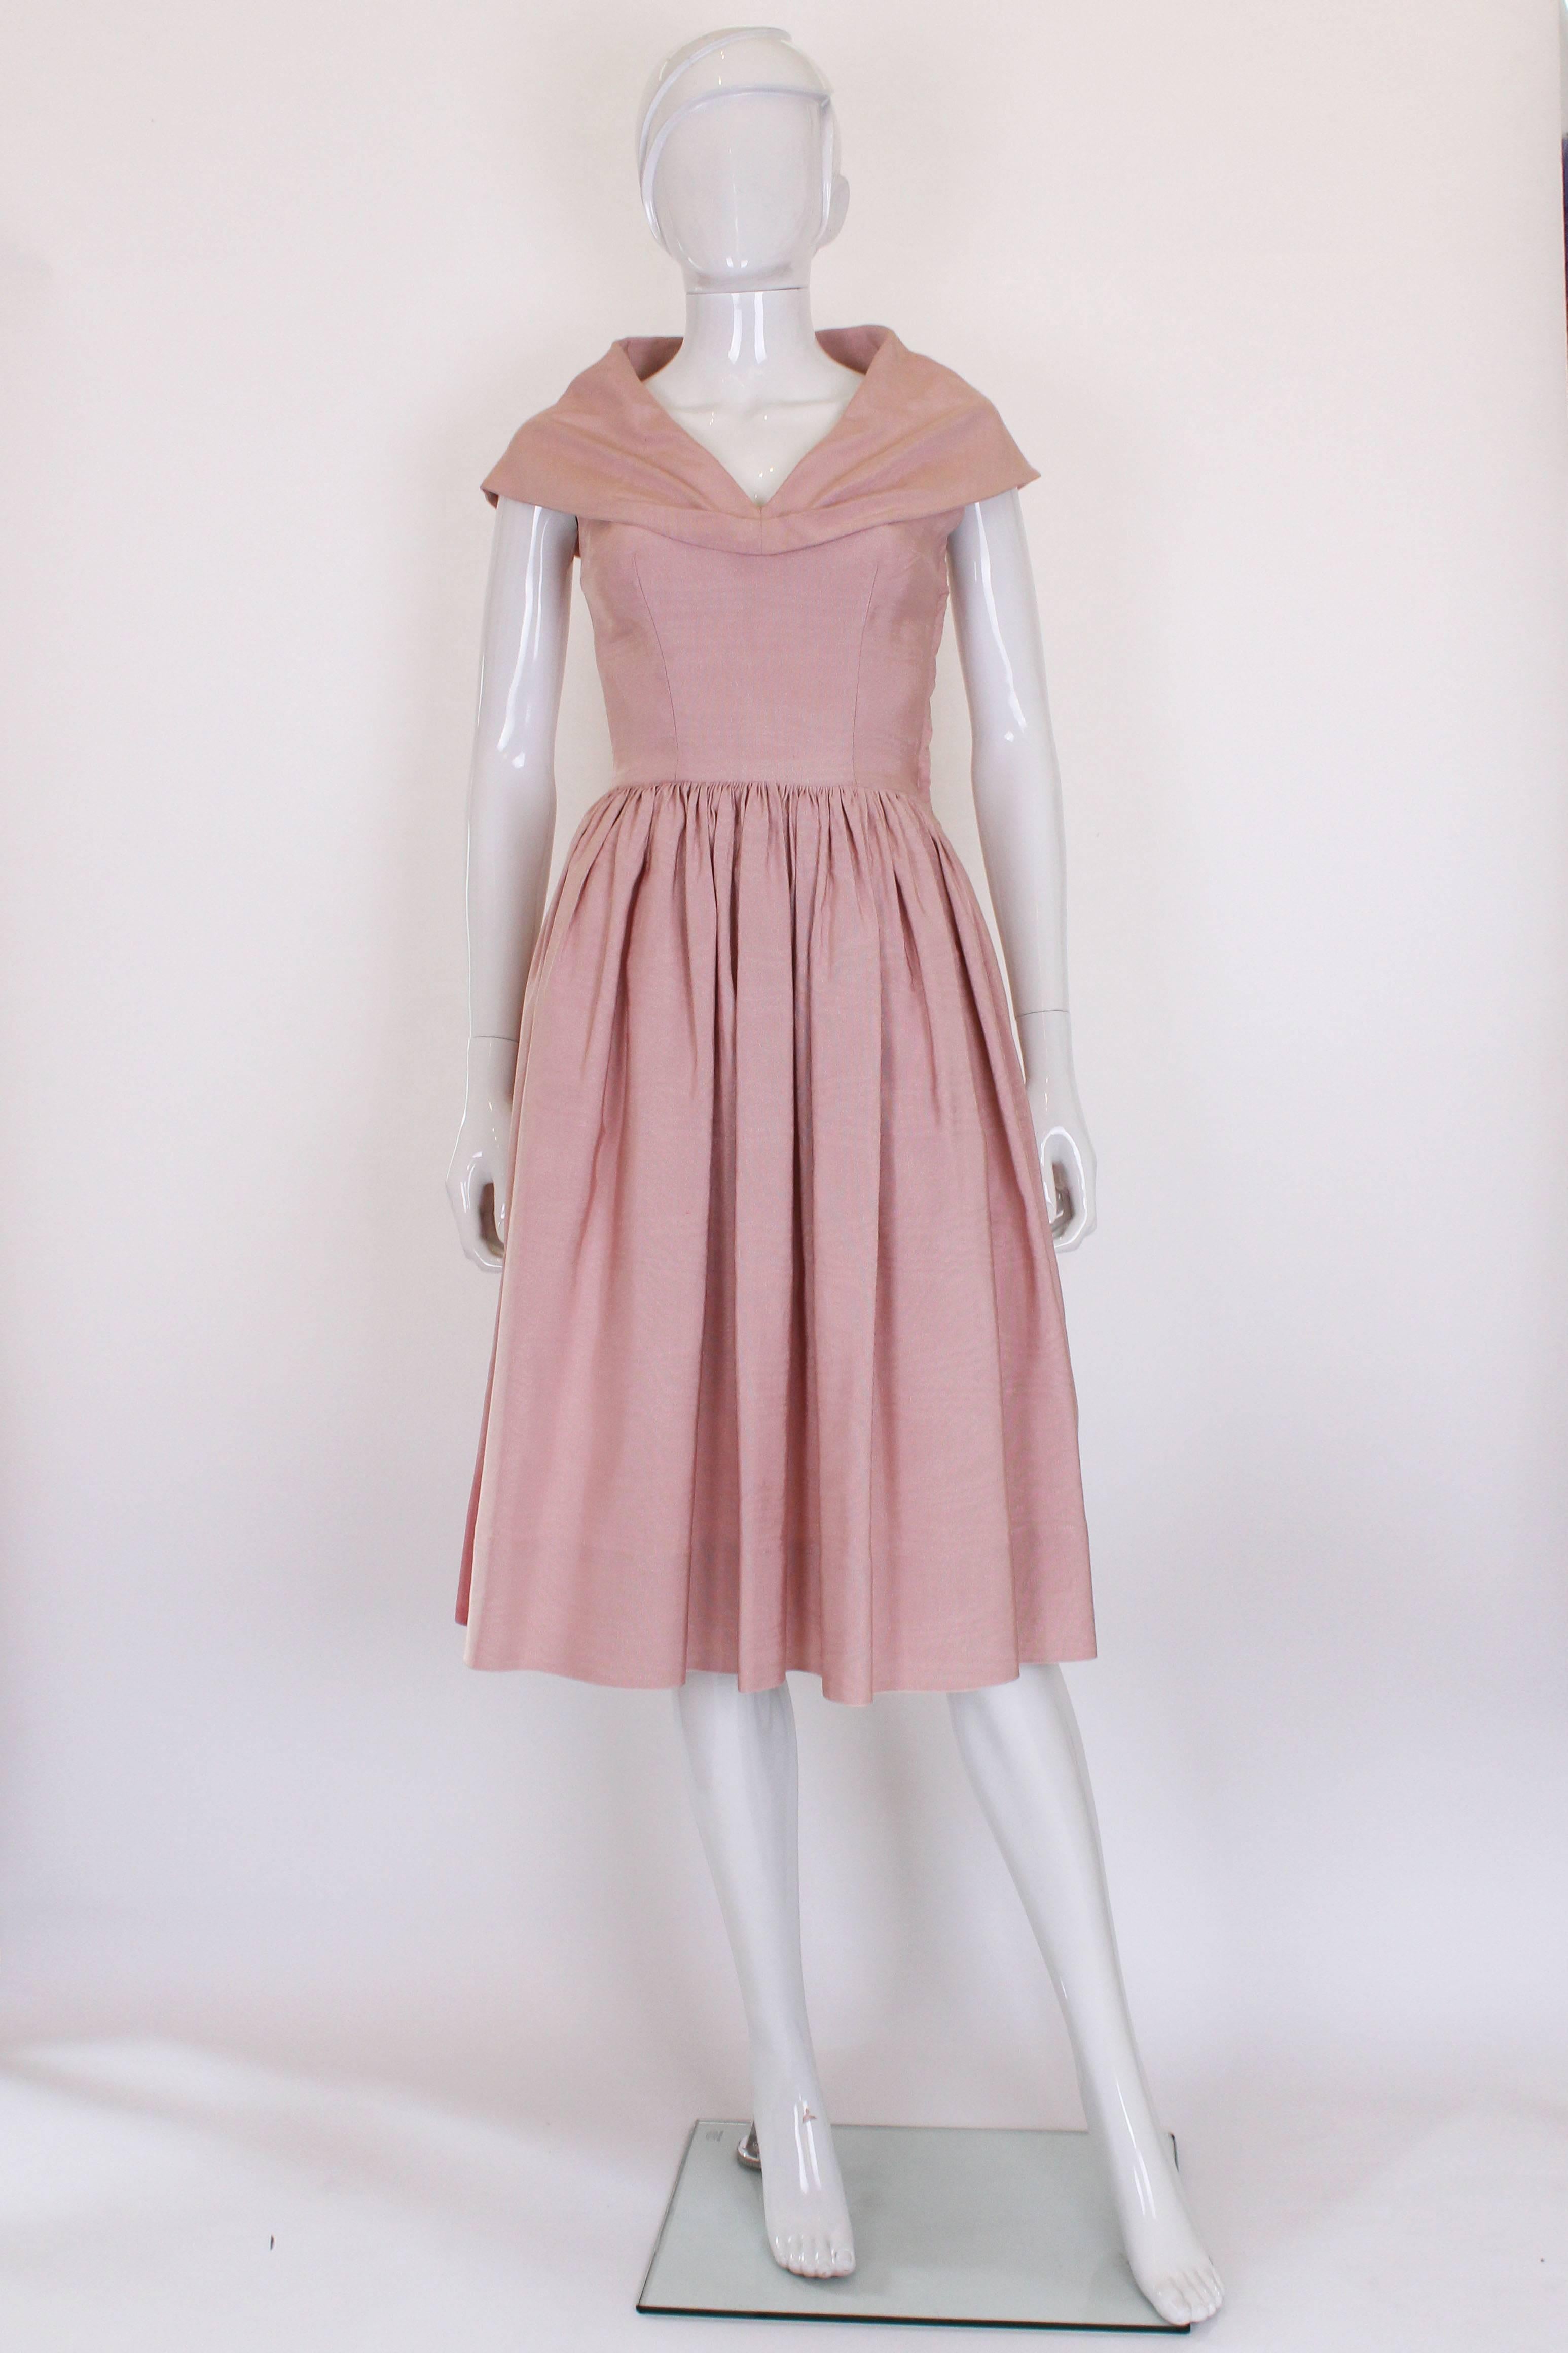 This is a stunning 1950s in a soft dusty pink. The fabric is a ribbed, structured silk that helps to shape the dress. The skirt is densely gathered around the waist so that the skirt has lots of volume. The top is very fitted and has a large shawl